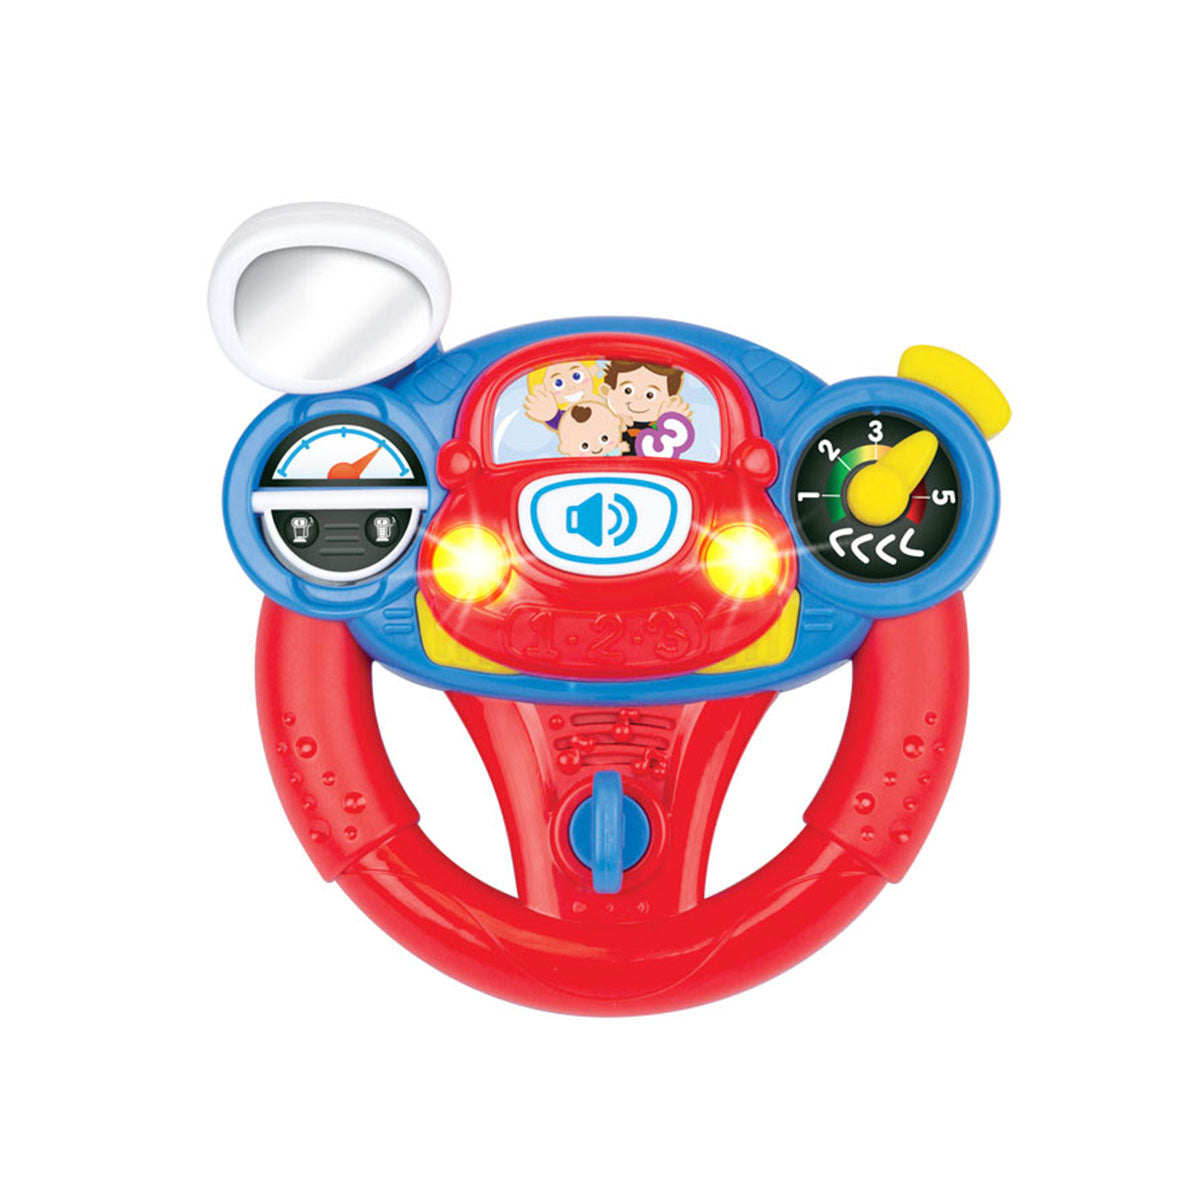 Winfun - Lil Learner Driver Toy